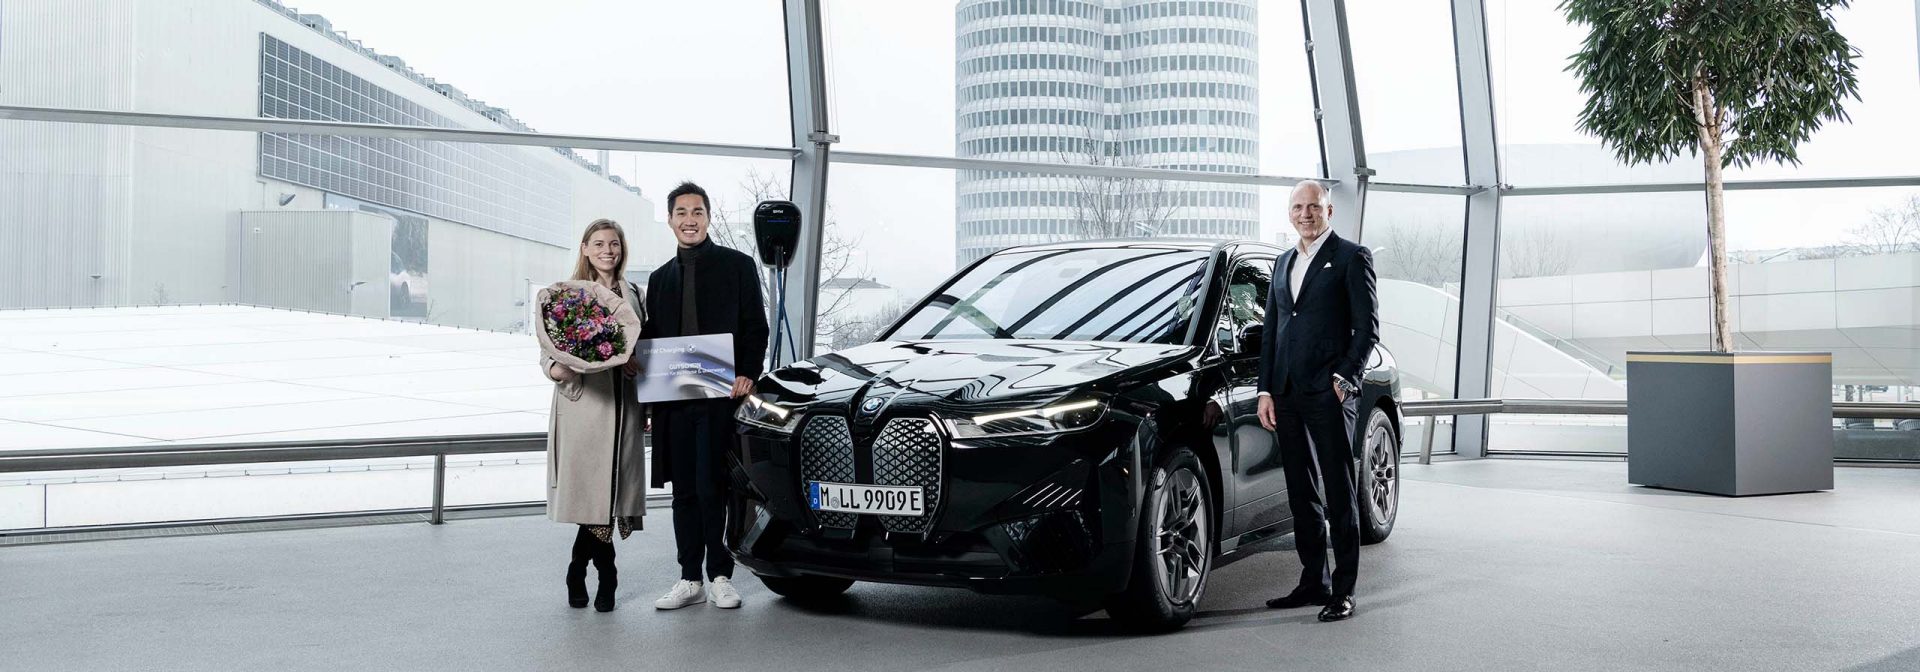 The BMW Group has delivered its one-millionth electrified vehicle to its new owner.